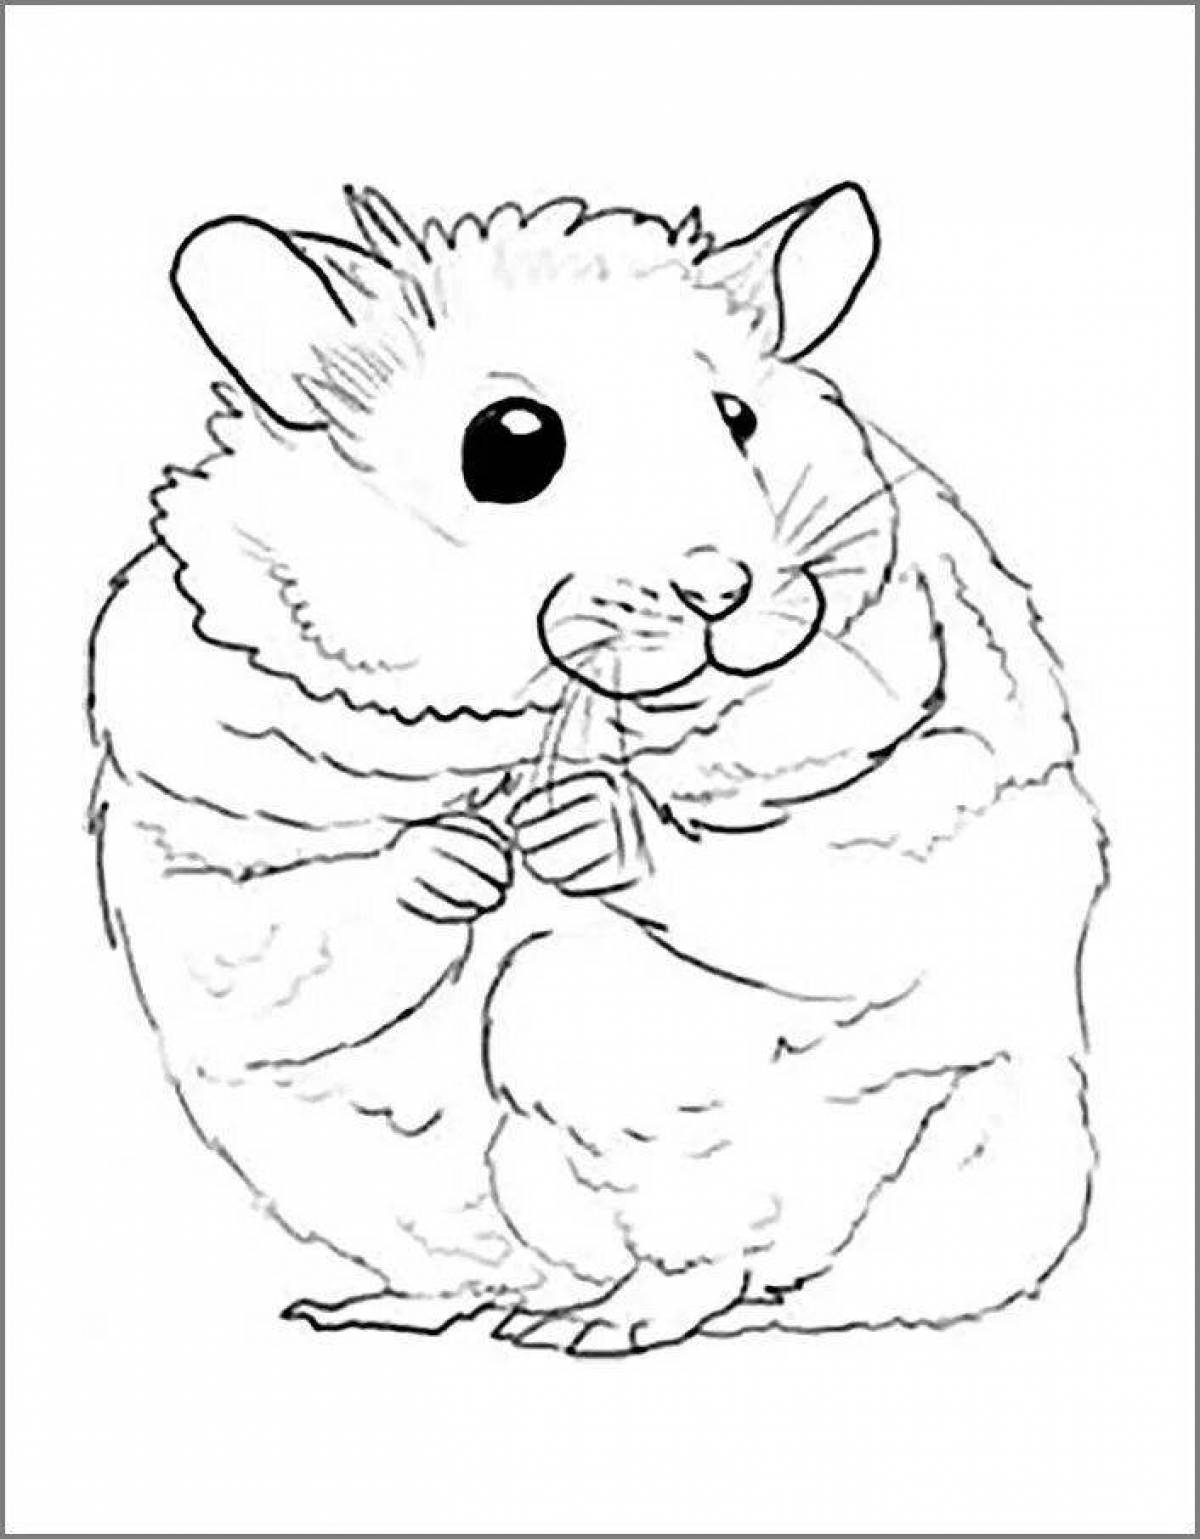 Coloring book witty hamster